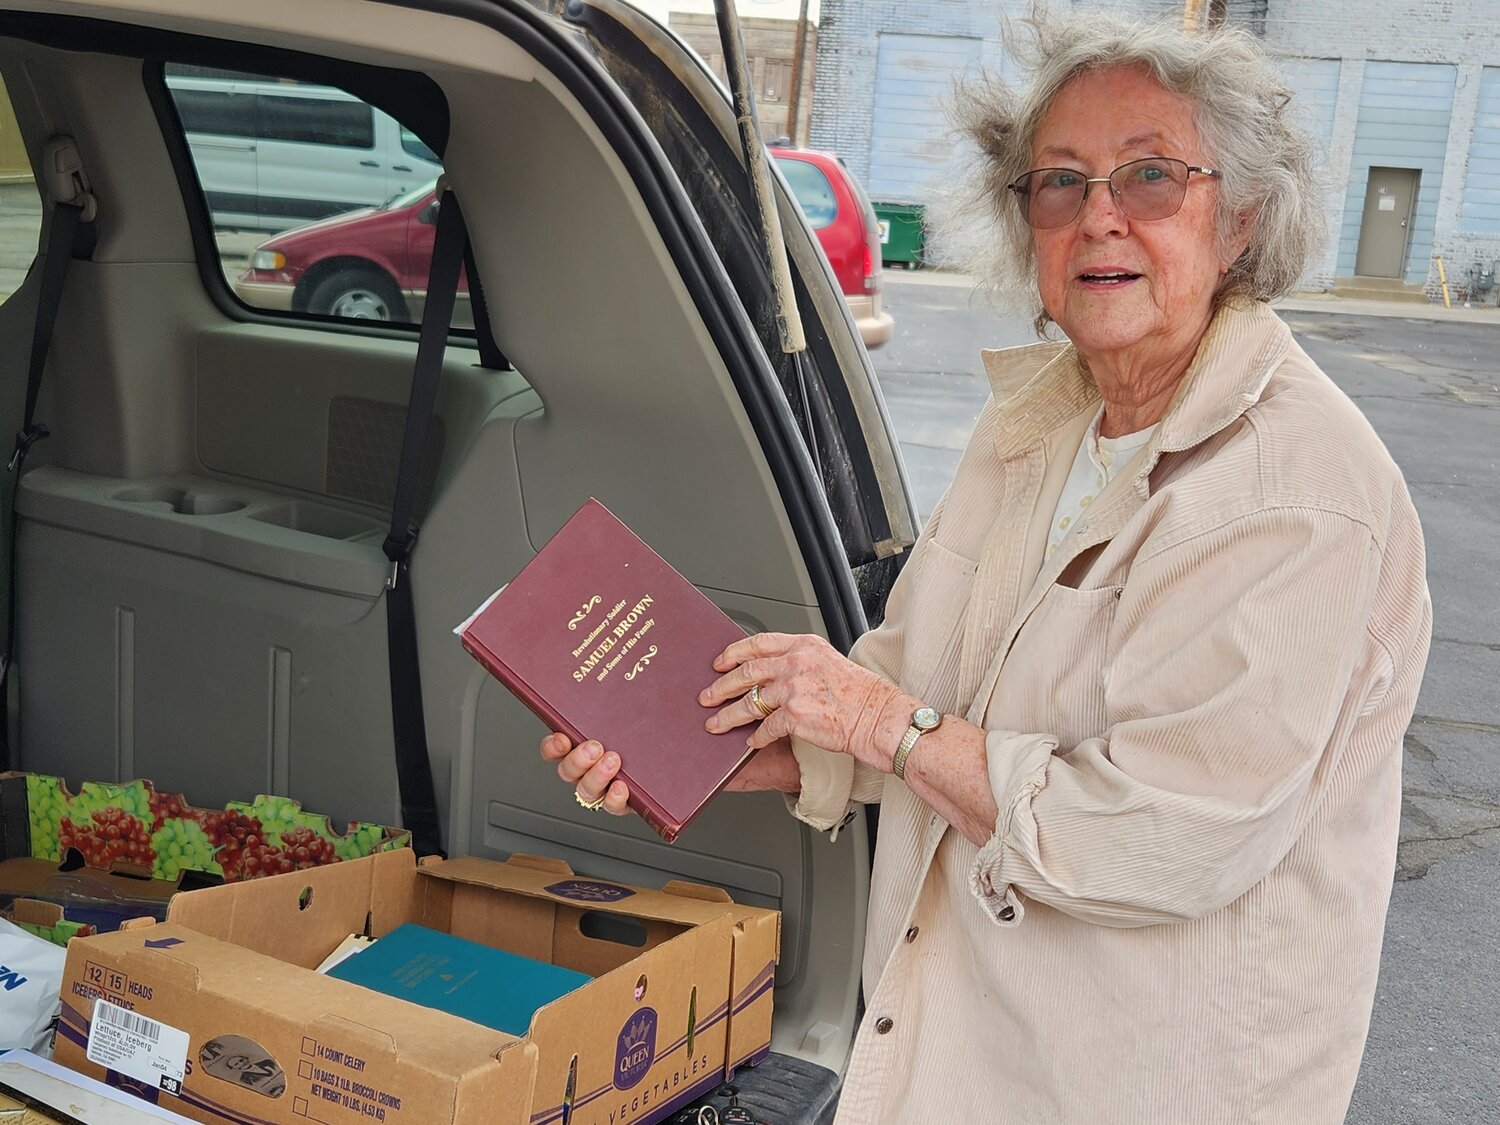 From a box in the back of her car, Joyce Campbell shows a favorite book about her fourth-great-grandfather Samuel Brown and his lineage. Campbell used the box full of genealogy materials during a recent talk in Boonsville.